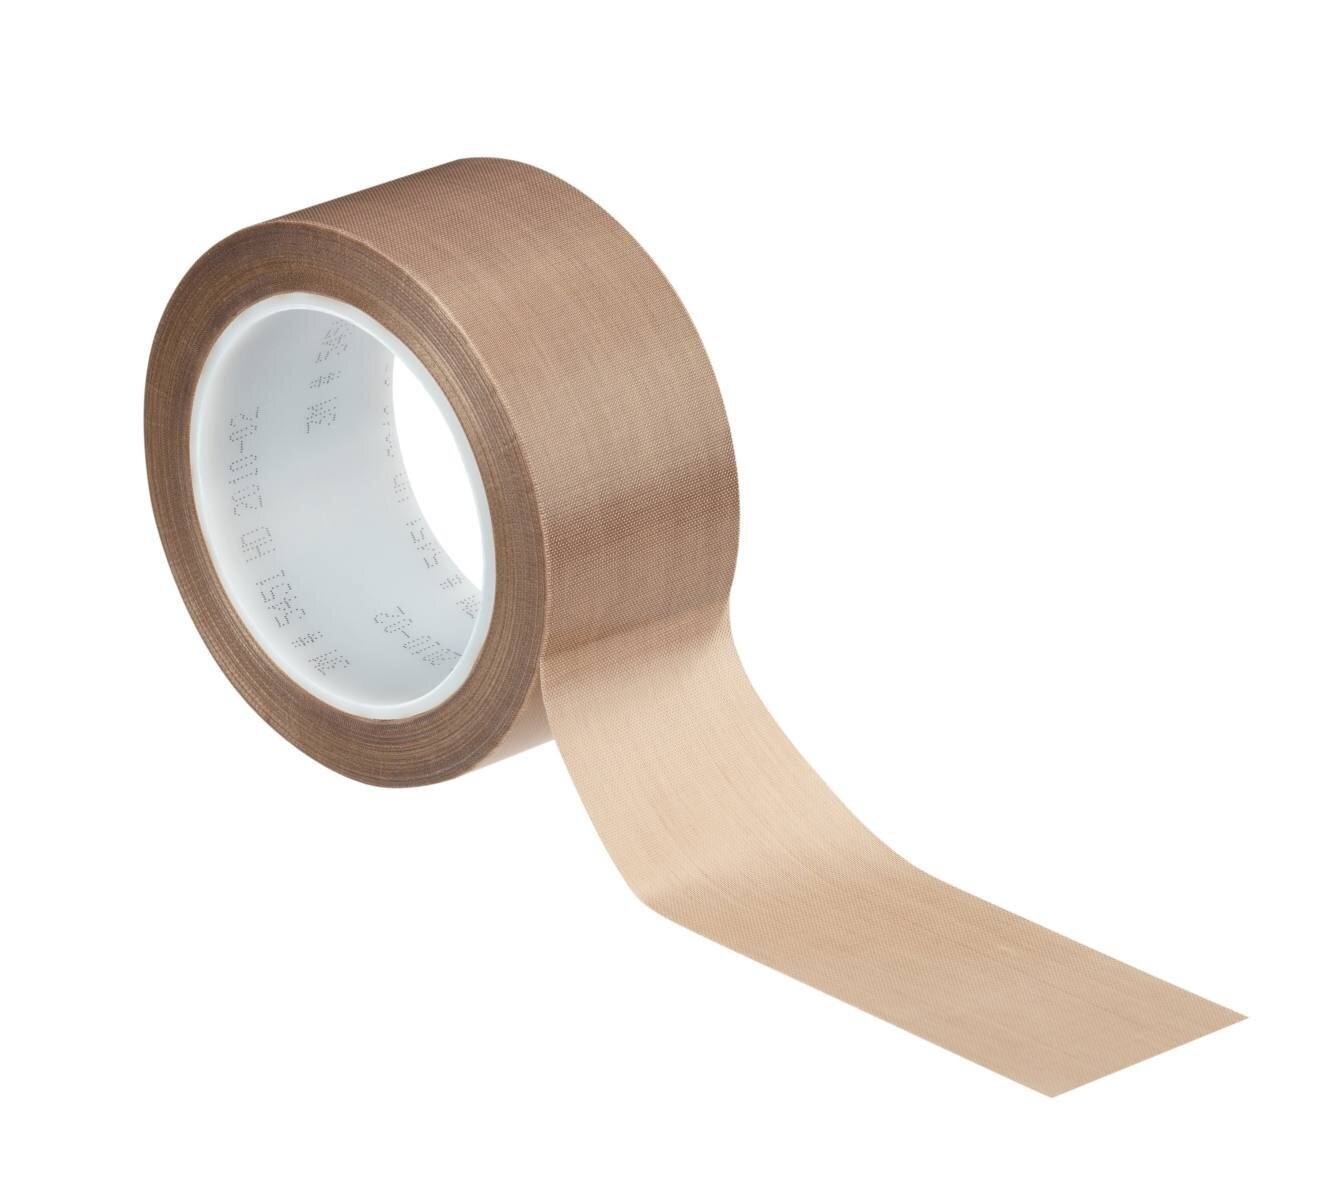 3M 5451 PTFE glass adhesive tape 100mmx33m, 0.14mm, silicone